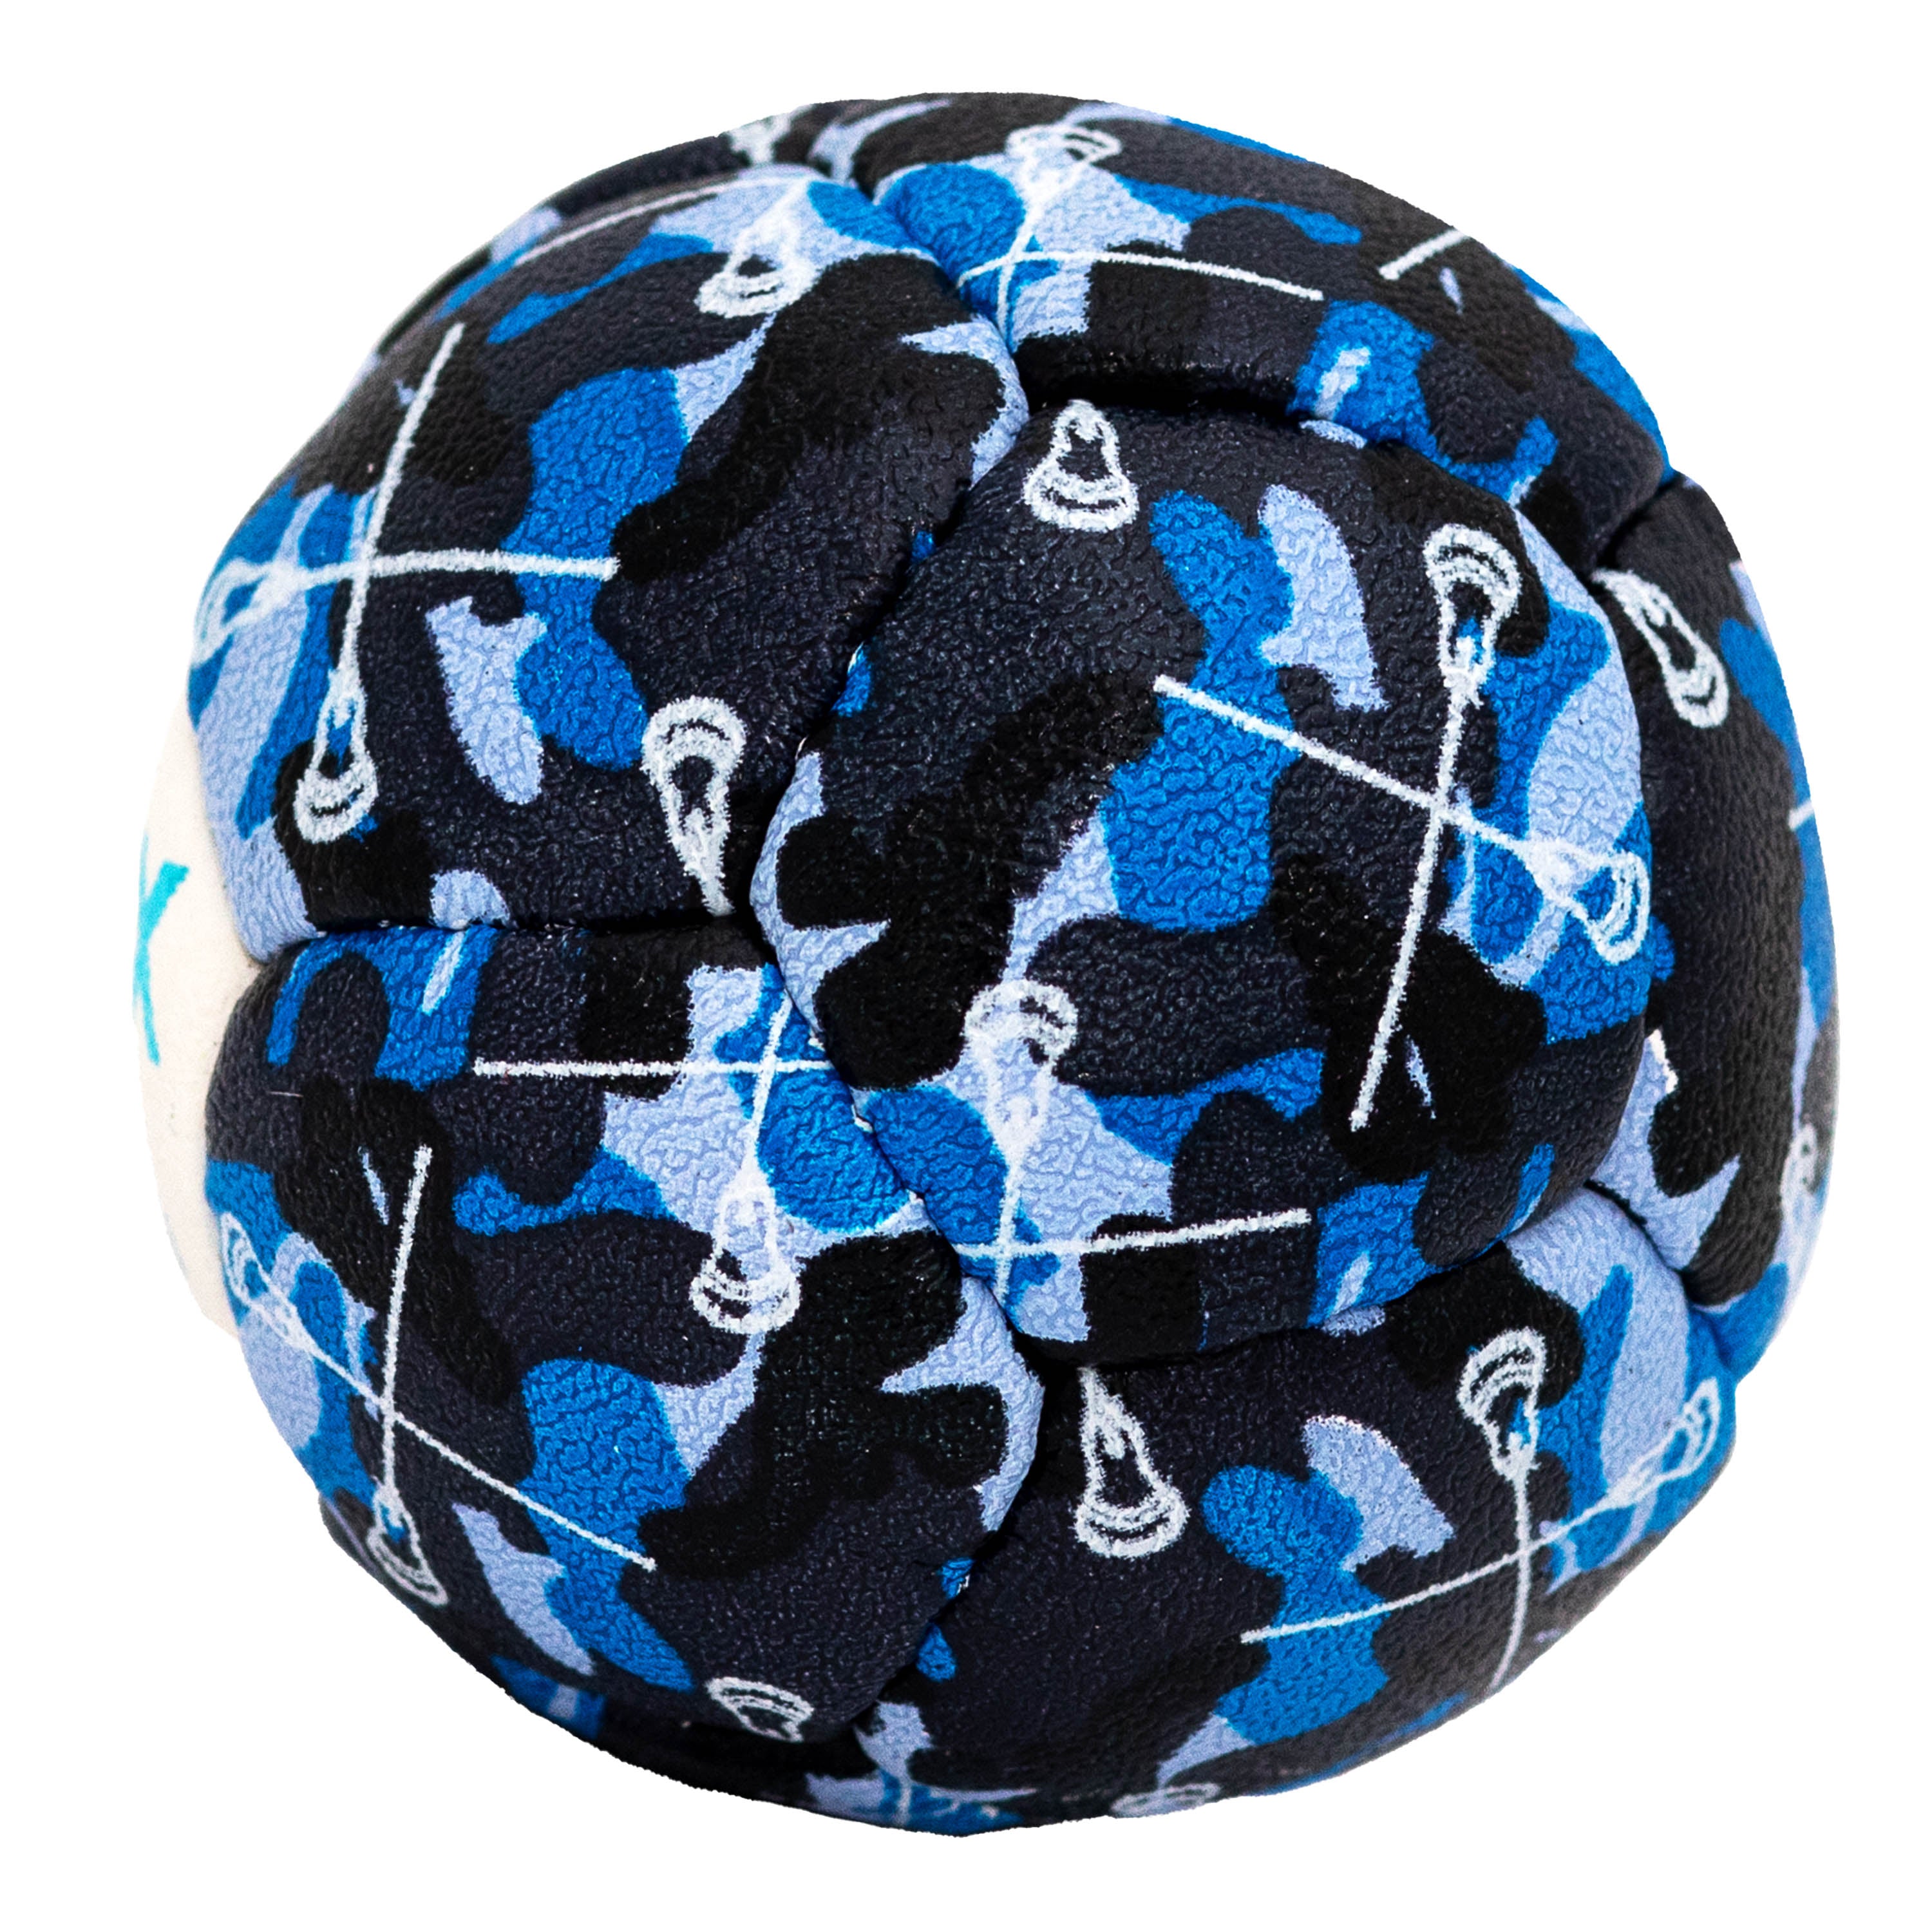 Blue Camo with Sticks Swax Lax lacrosse training ball - side view